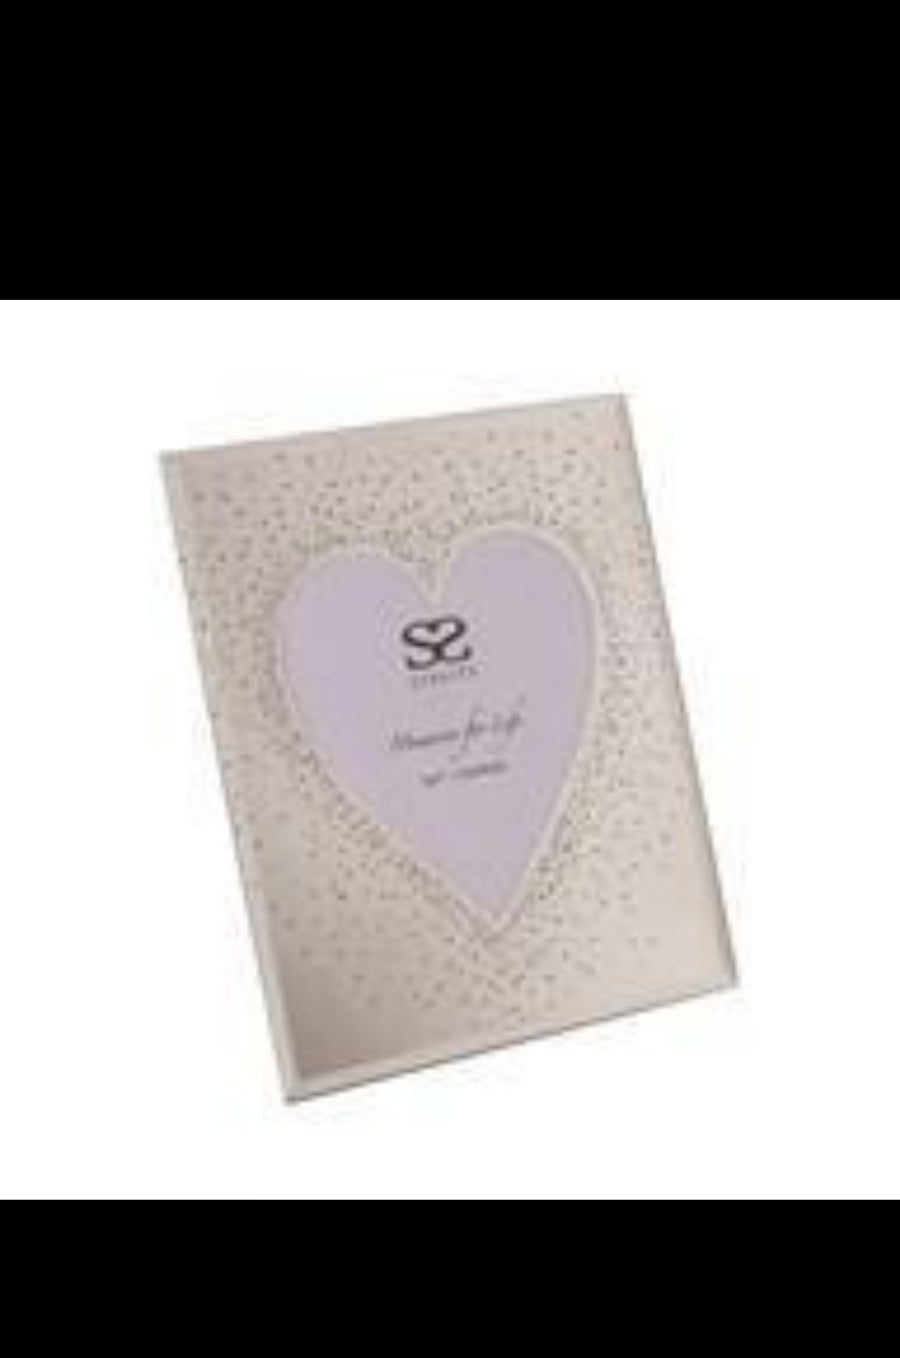 HEART MIRRORED SPARKLY PICTURE FRAME